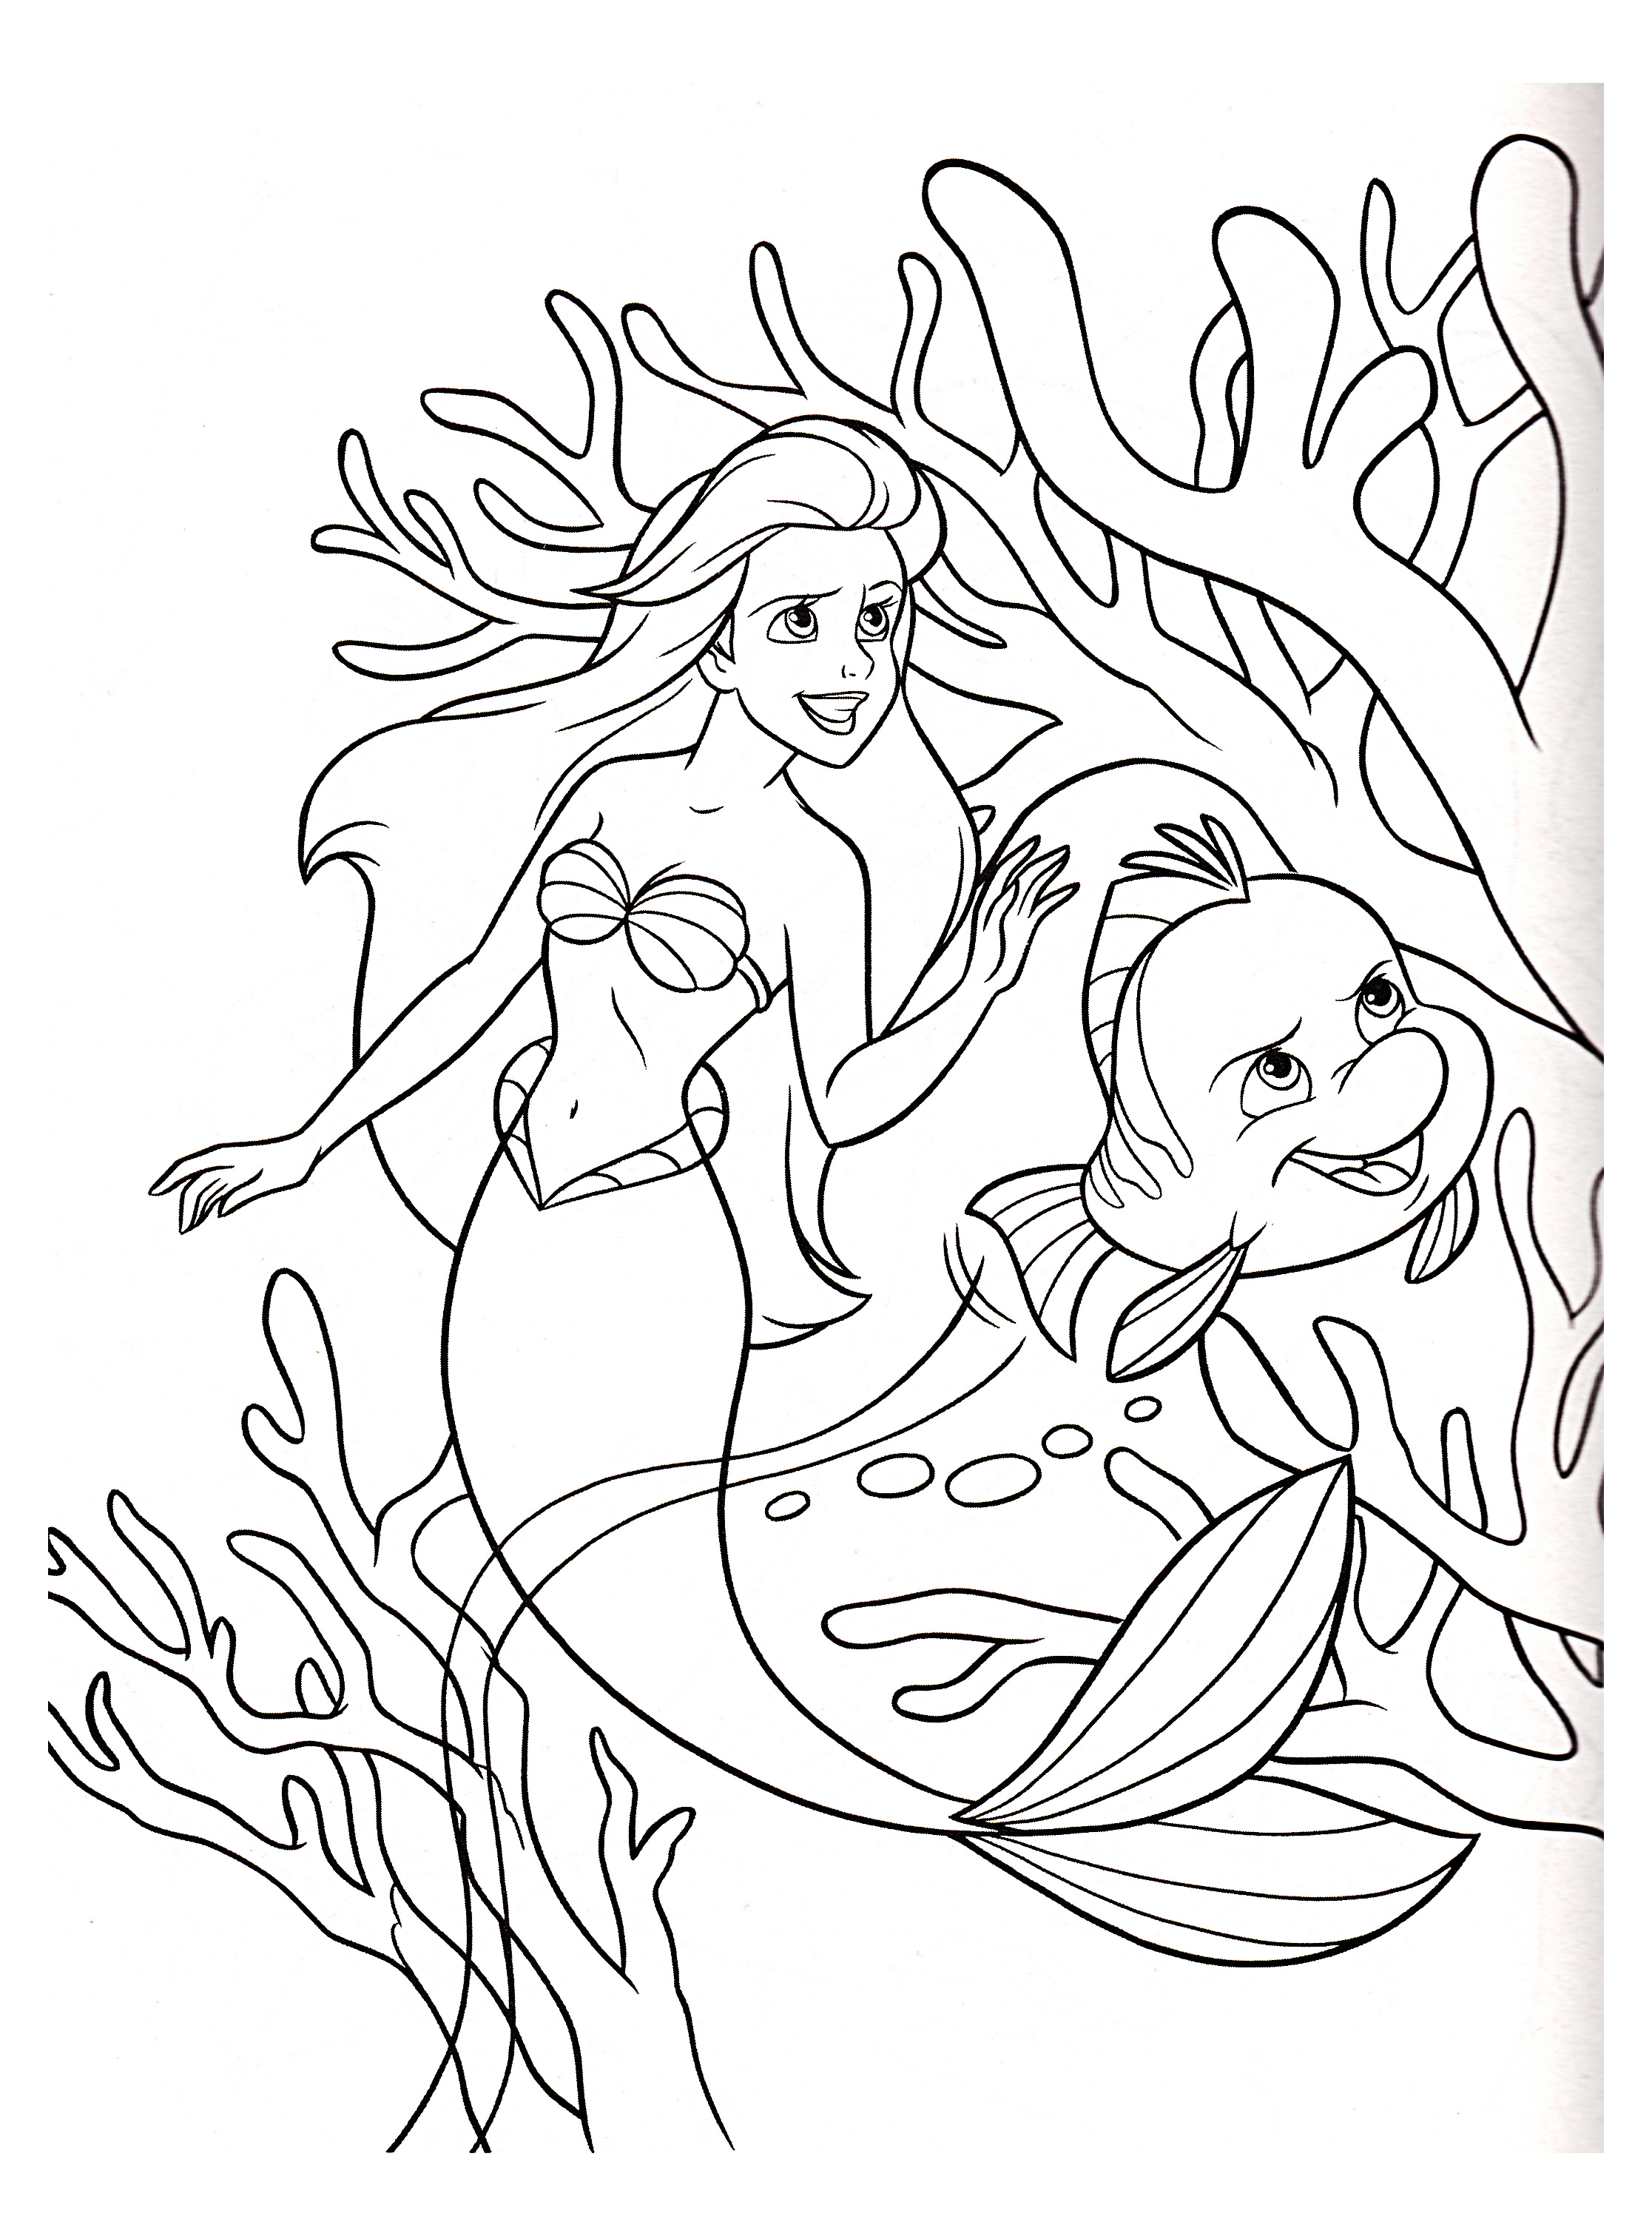 ariel-the-little-mermaid-disney-the-little-mermaid-kids-coloring-pages